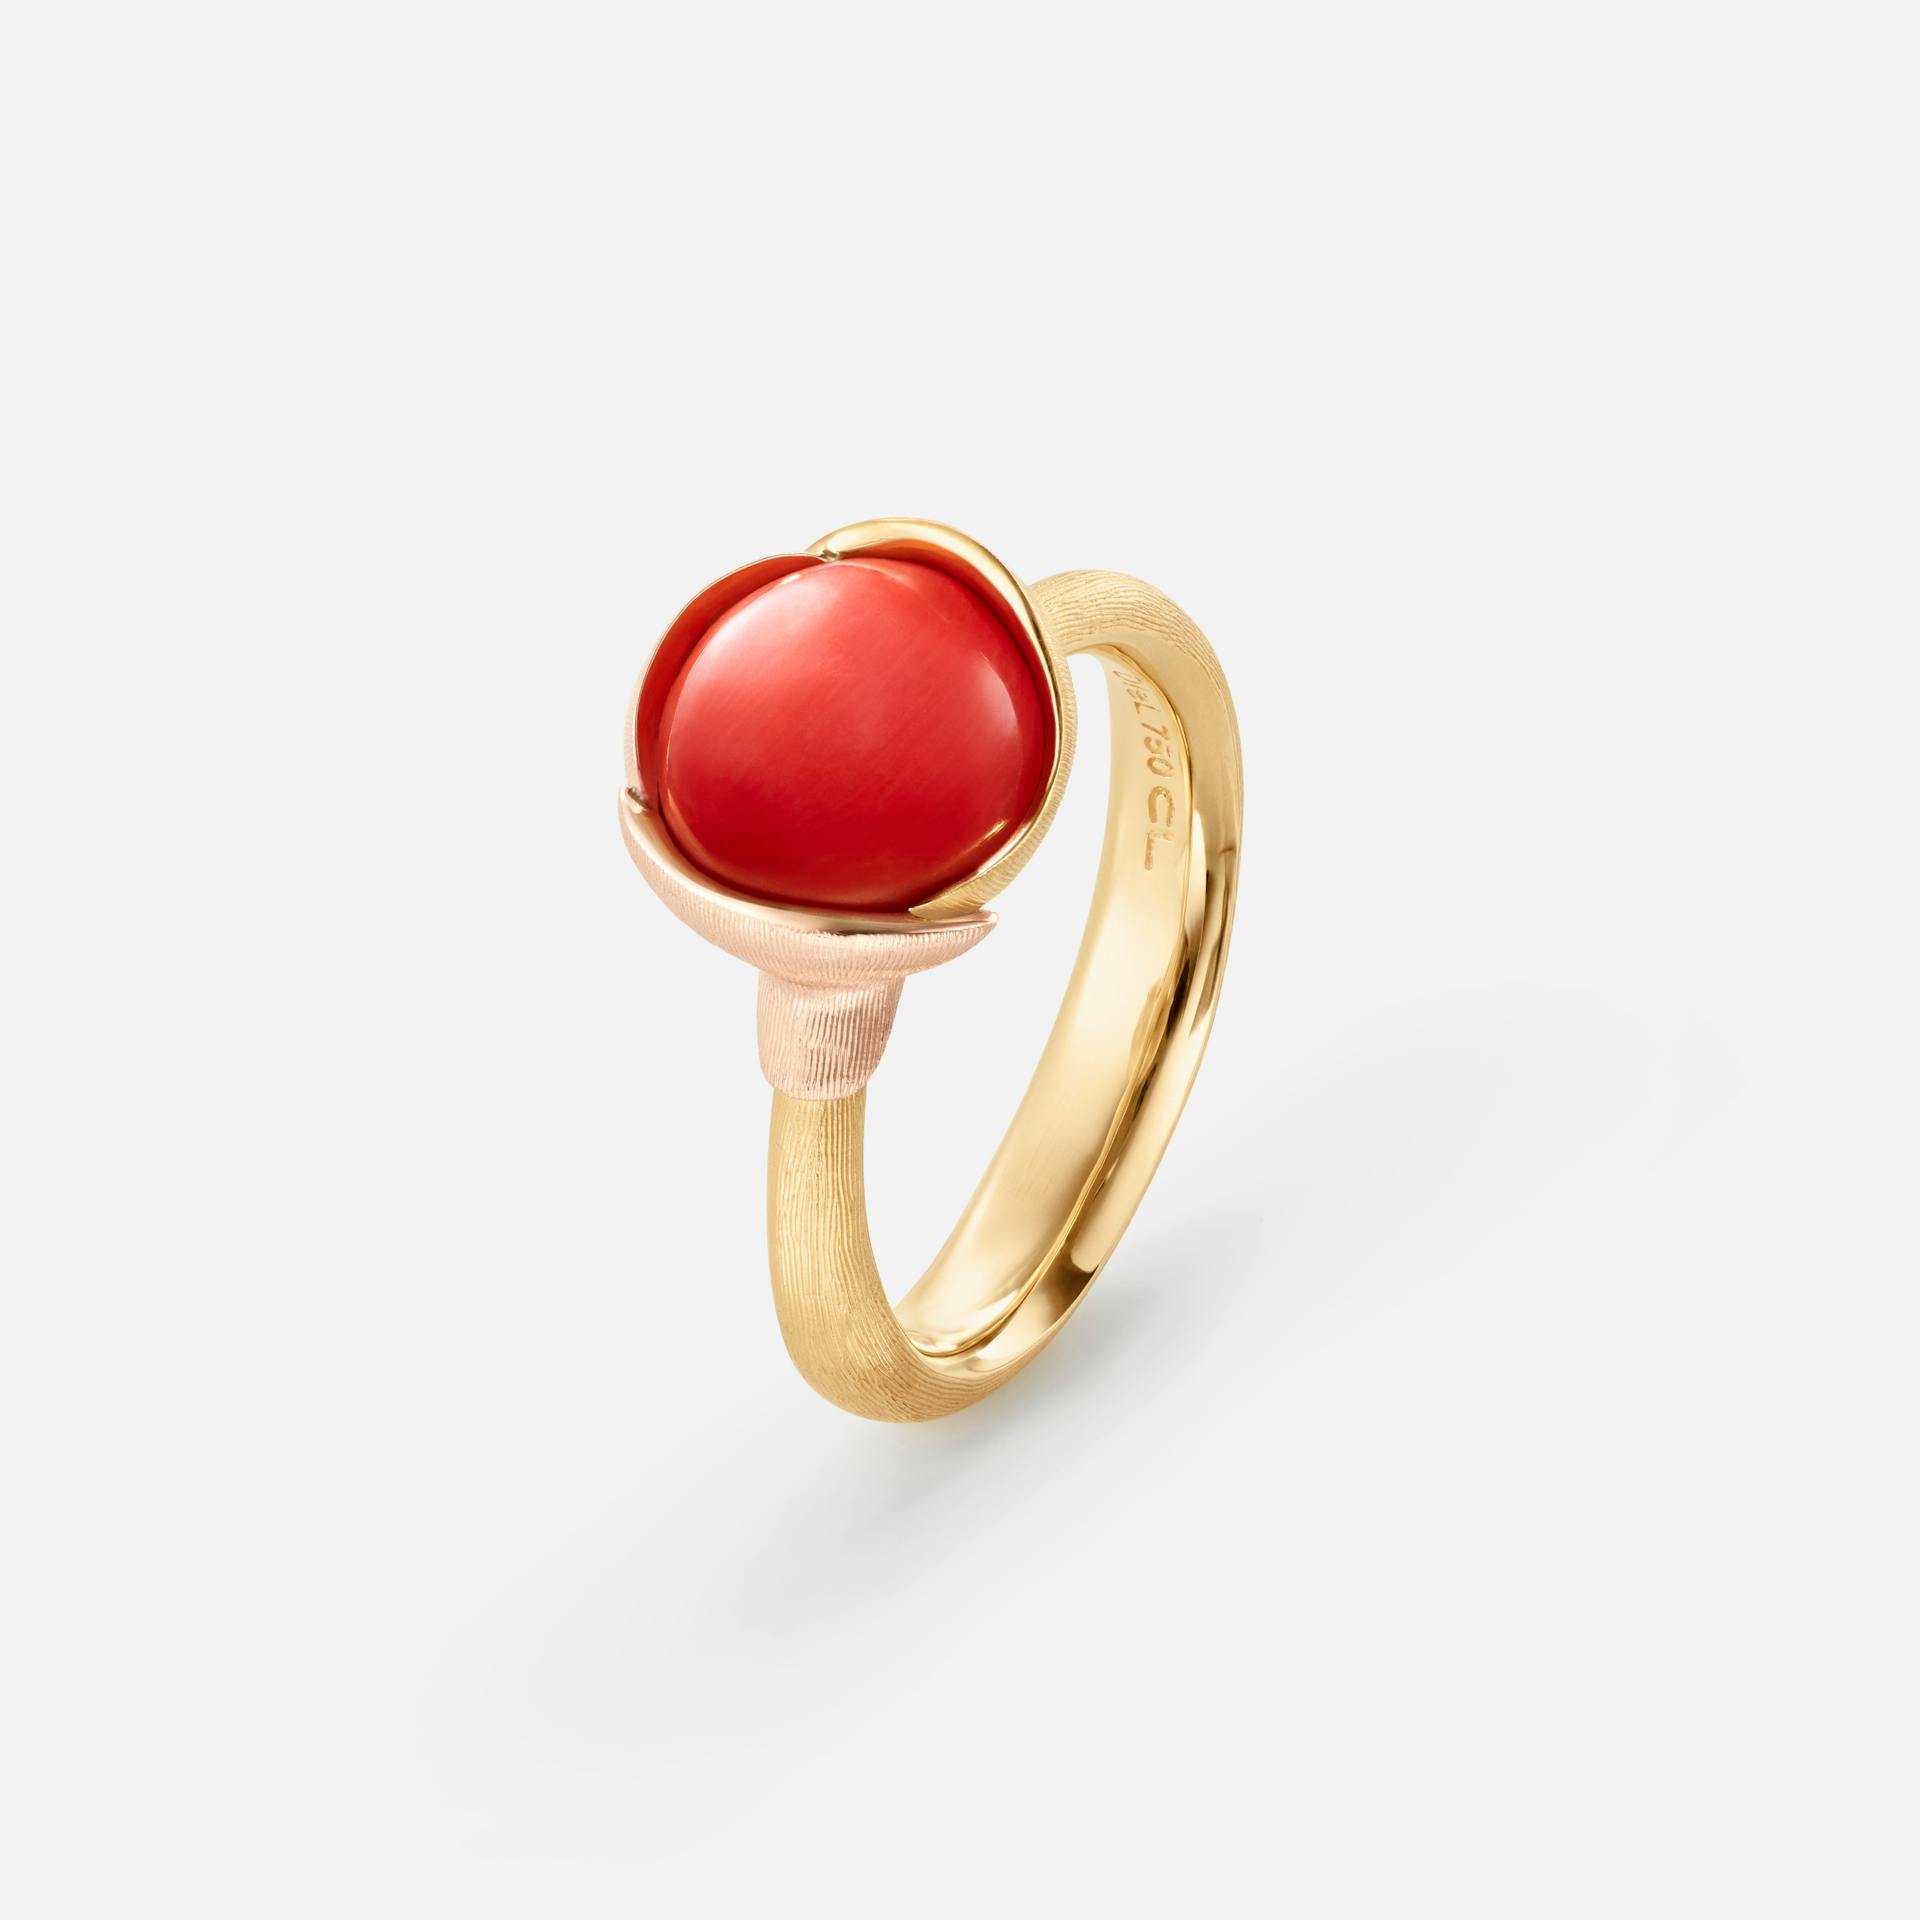 Lotus Ring size 1 in Yellow and Rose Gold  with Coral  |  Ole Lynggaard Copenhagen